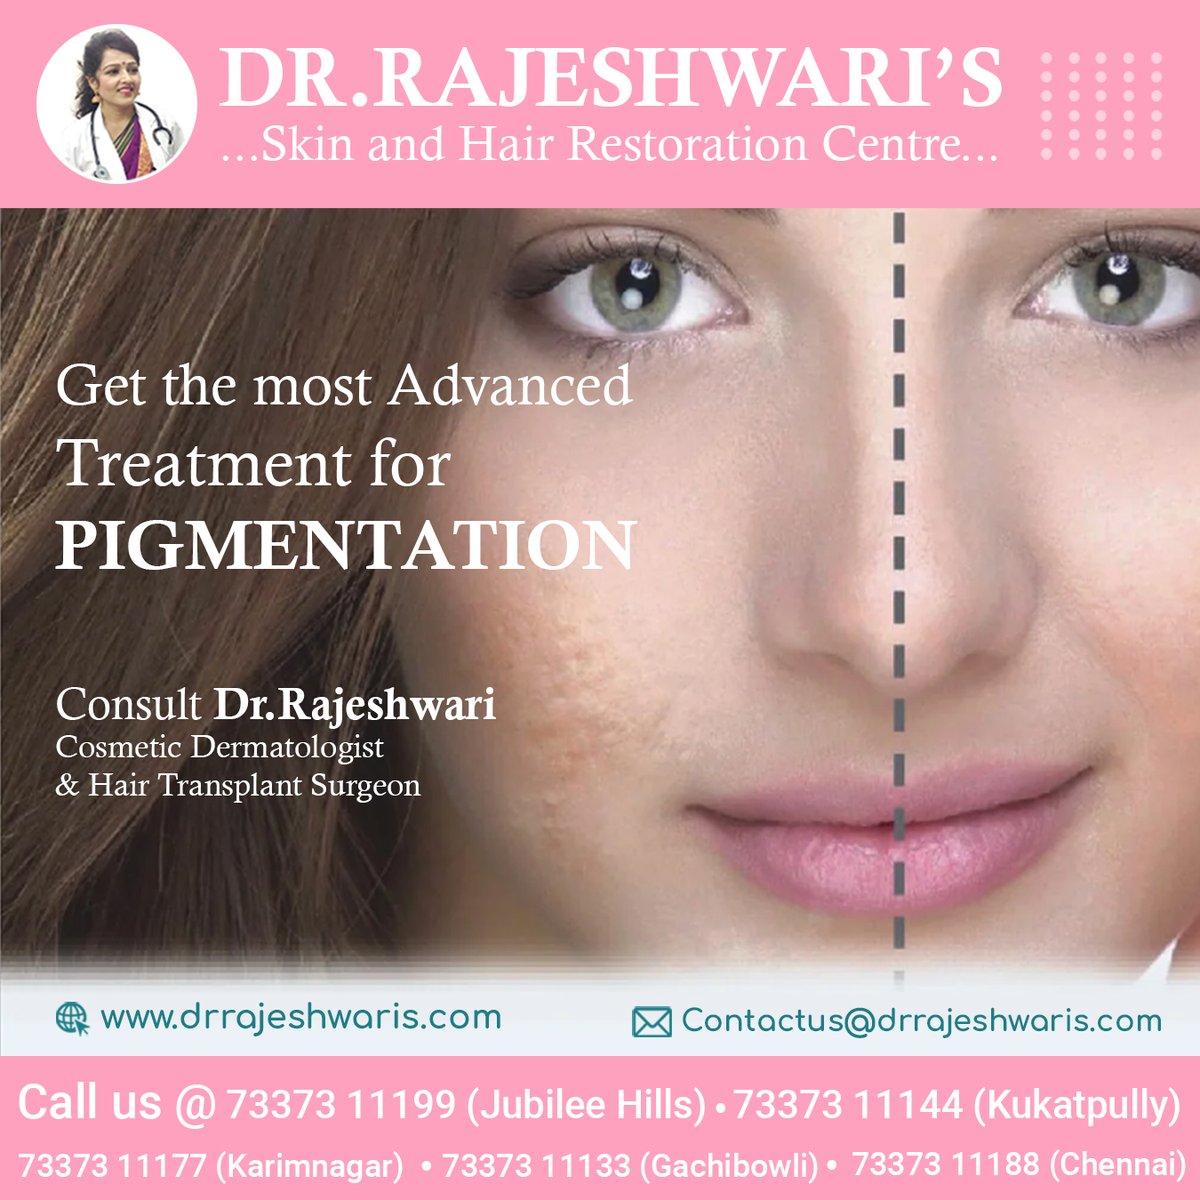 Experience the power of advanced treatments for pigmentation, specially curated to give you flawless skin. Don't let pigmentation dull your shine any longer! 

#AdvancedTreatment #ByePigmentation #FlawlessSkin #SkincareSolutions #ClearComplexion #NoMoreSpots #PigmentationRemedy